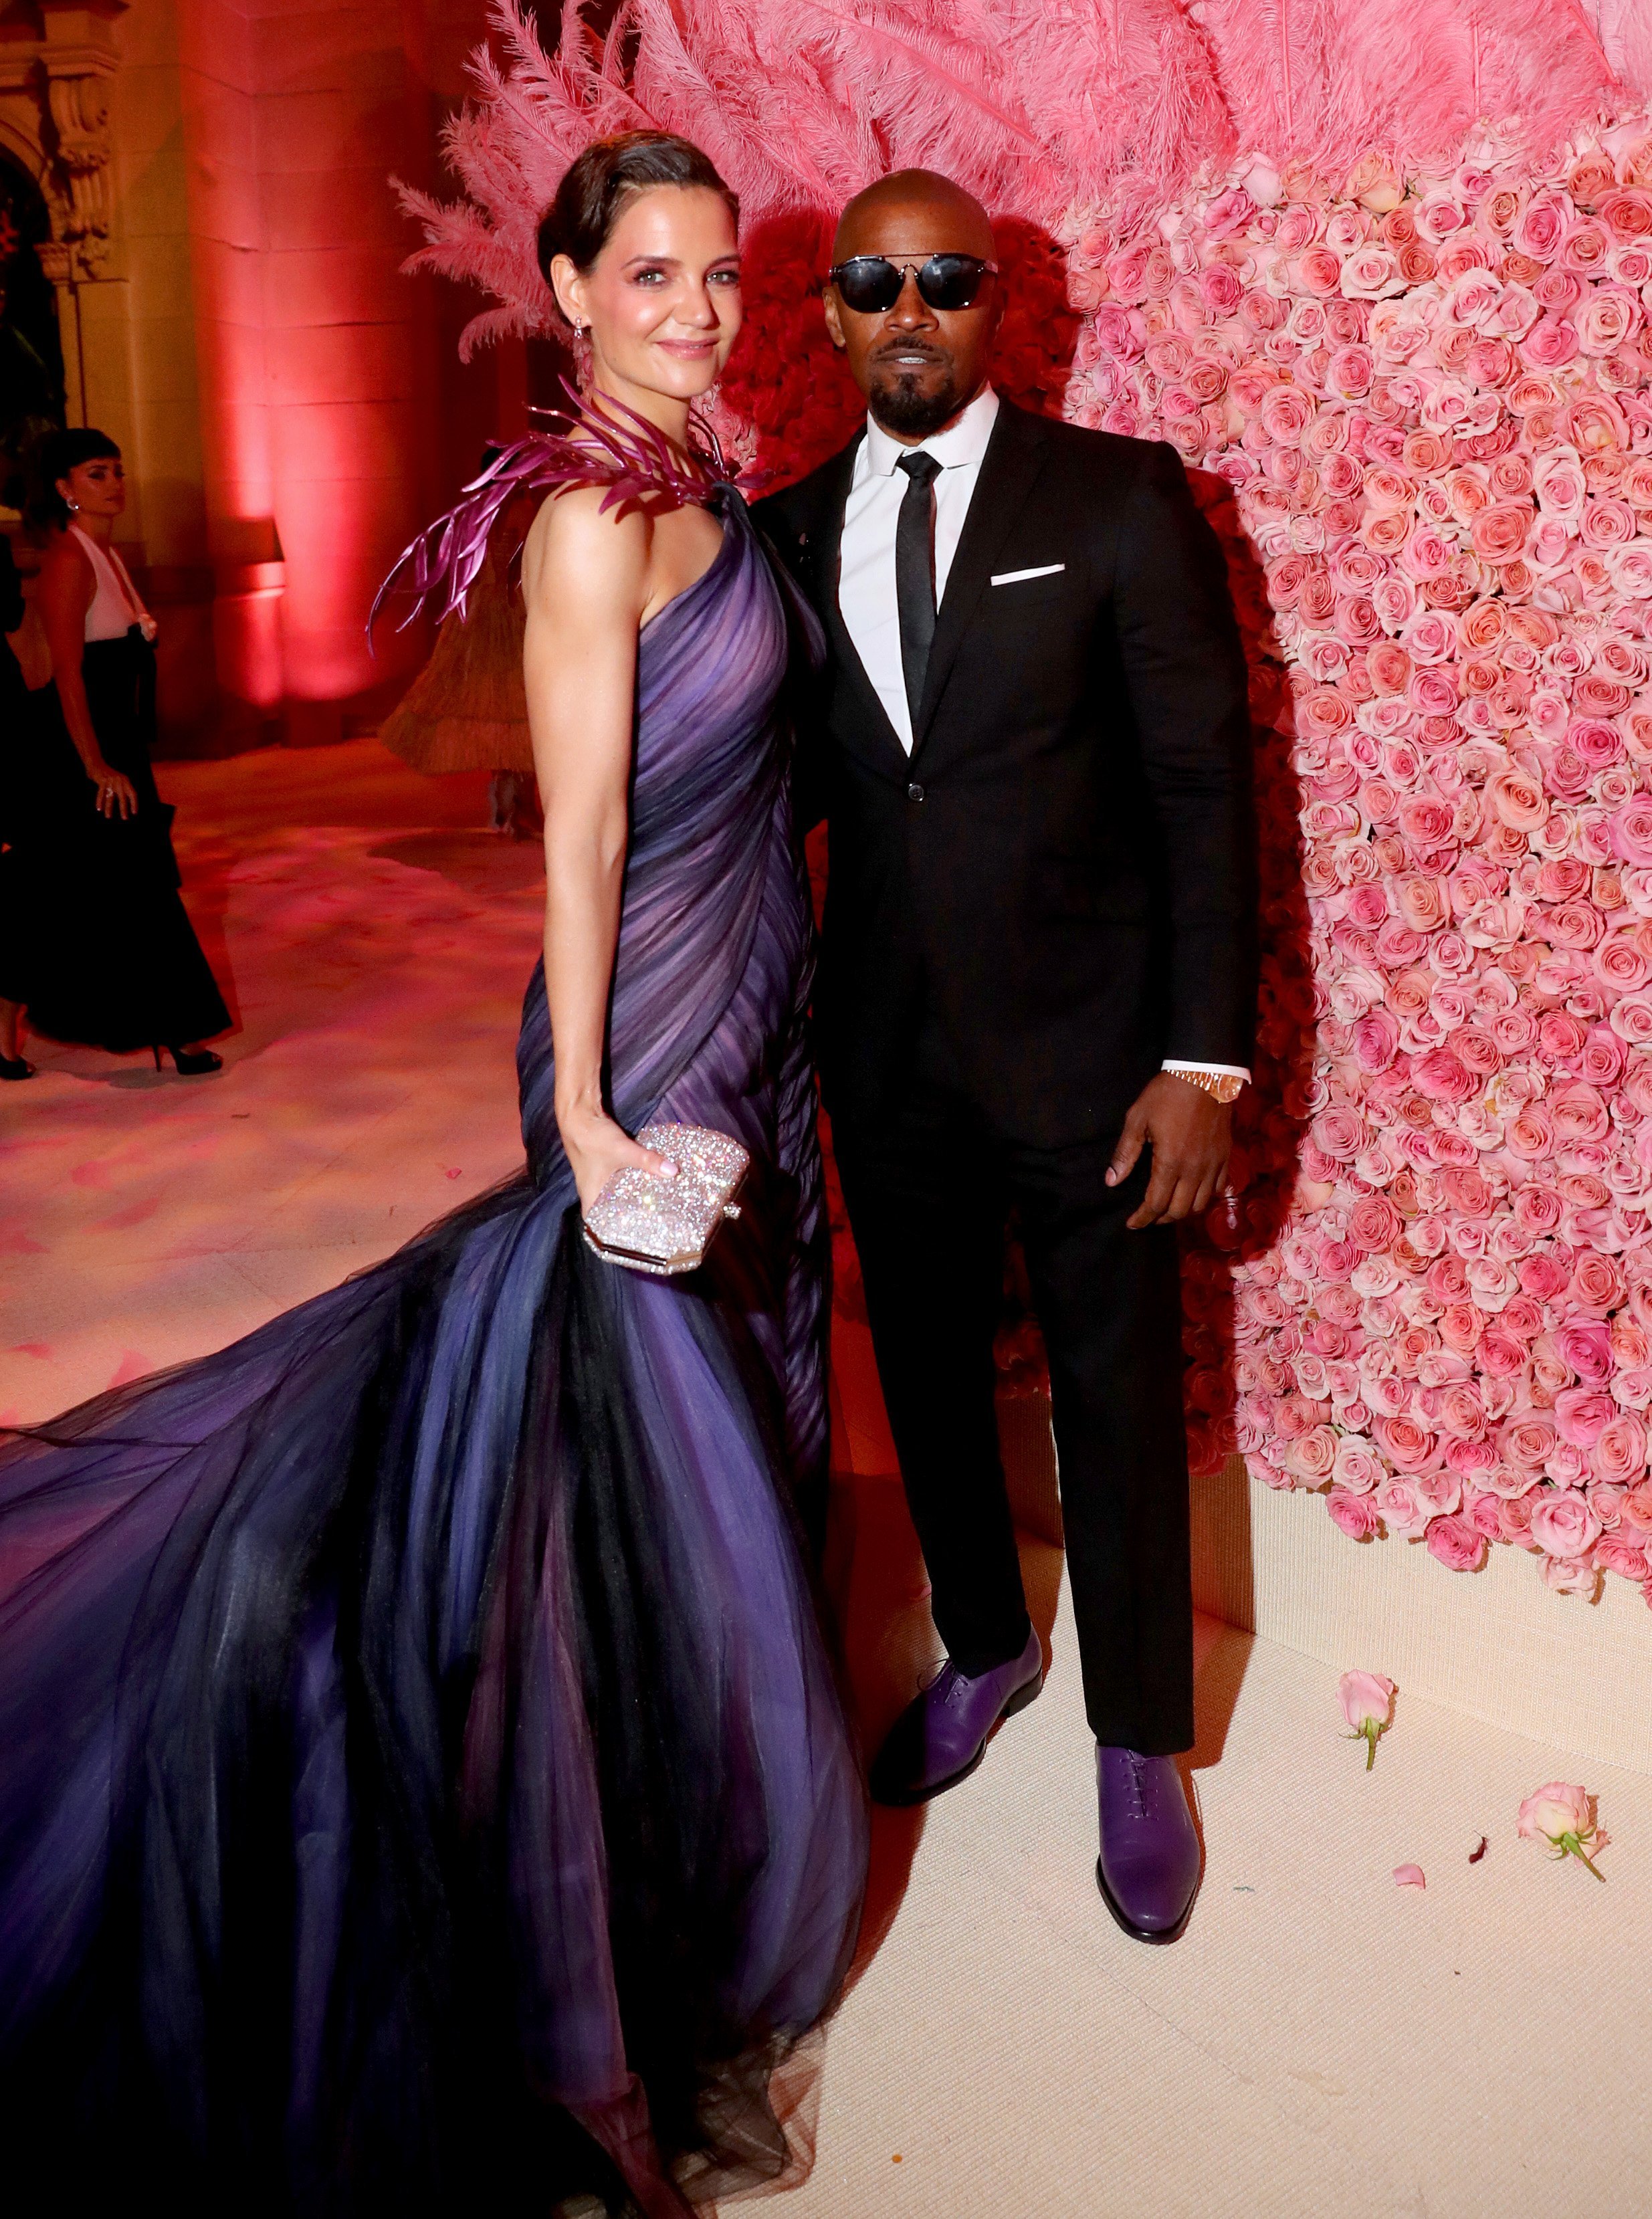 Katie Holmes & Jamie Foxx at the Met Gala on May 06, 2019 in New York City | Photo: Getty Images